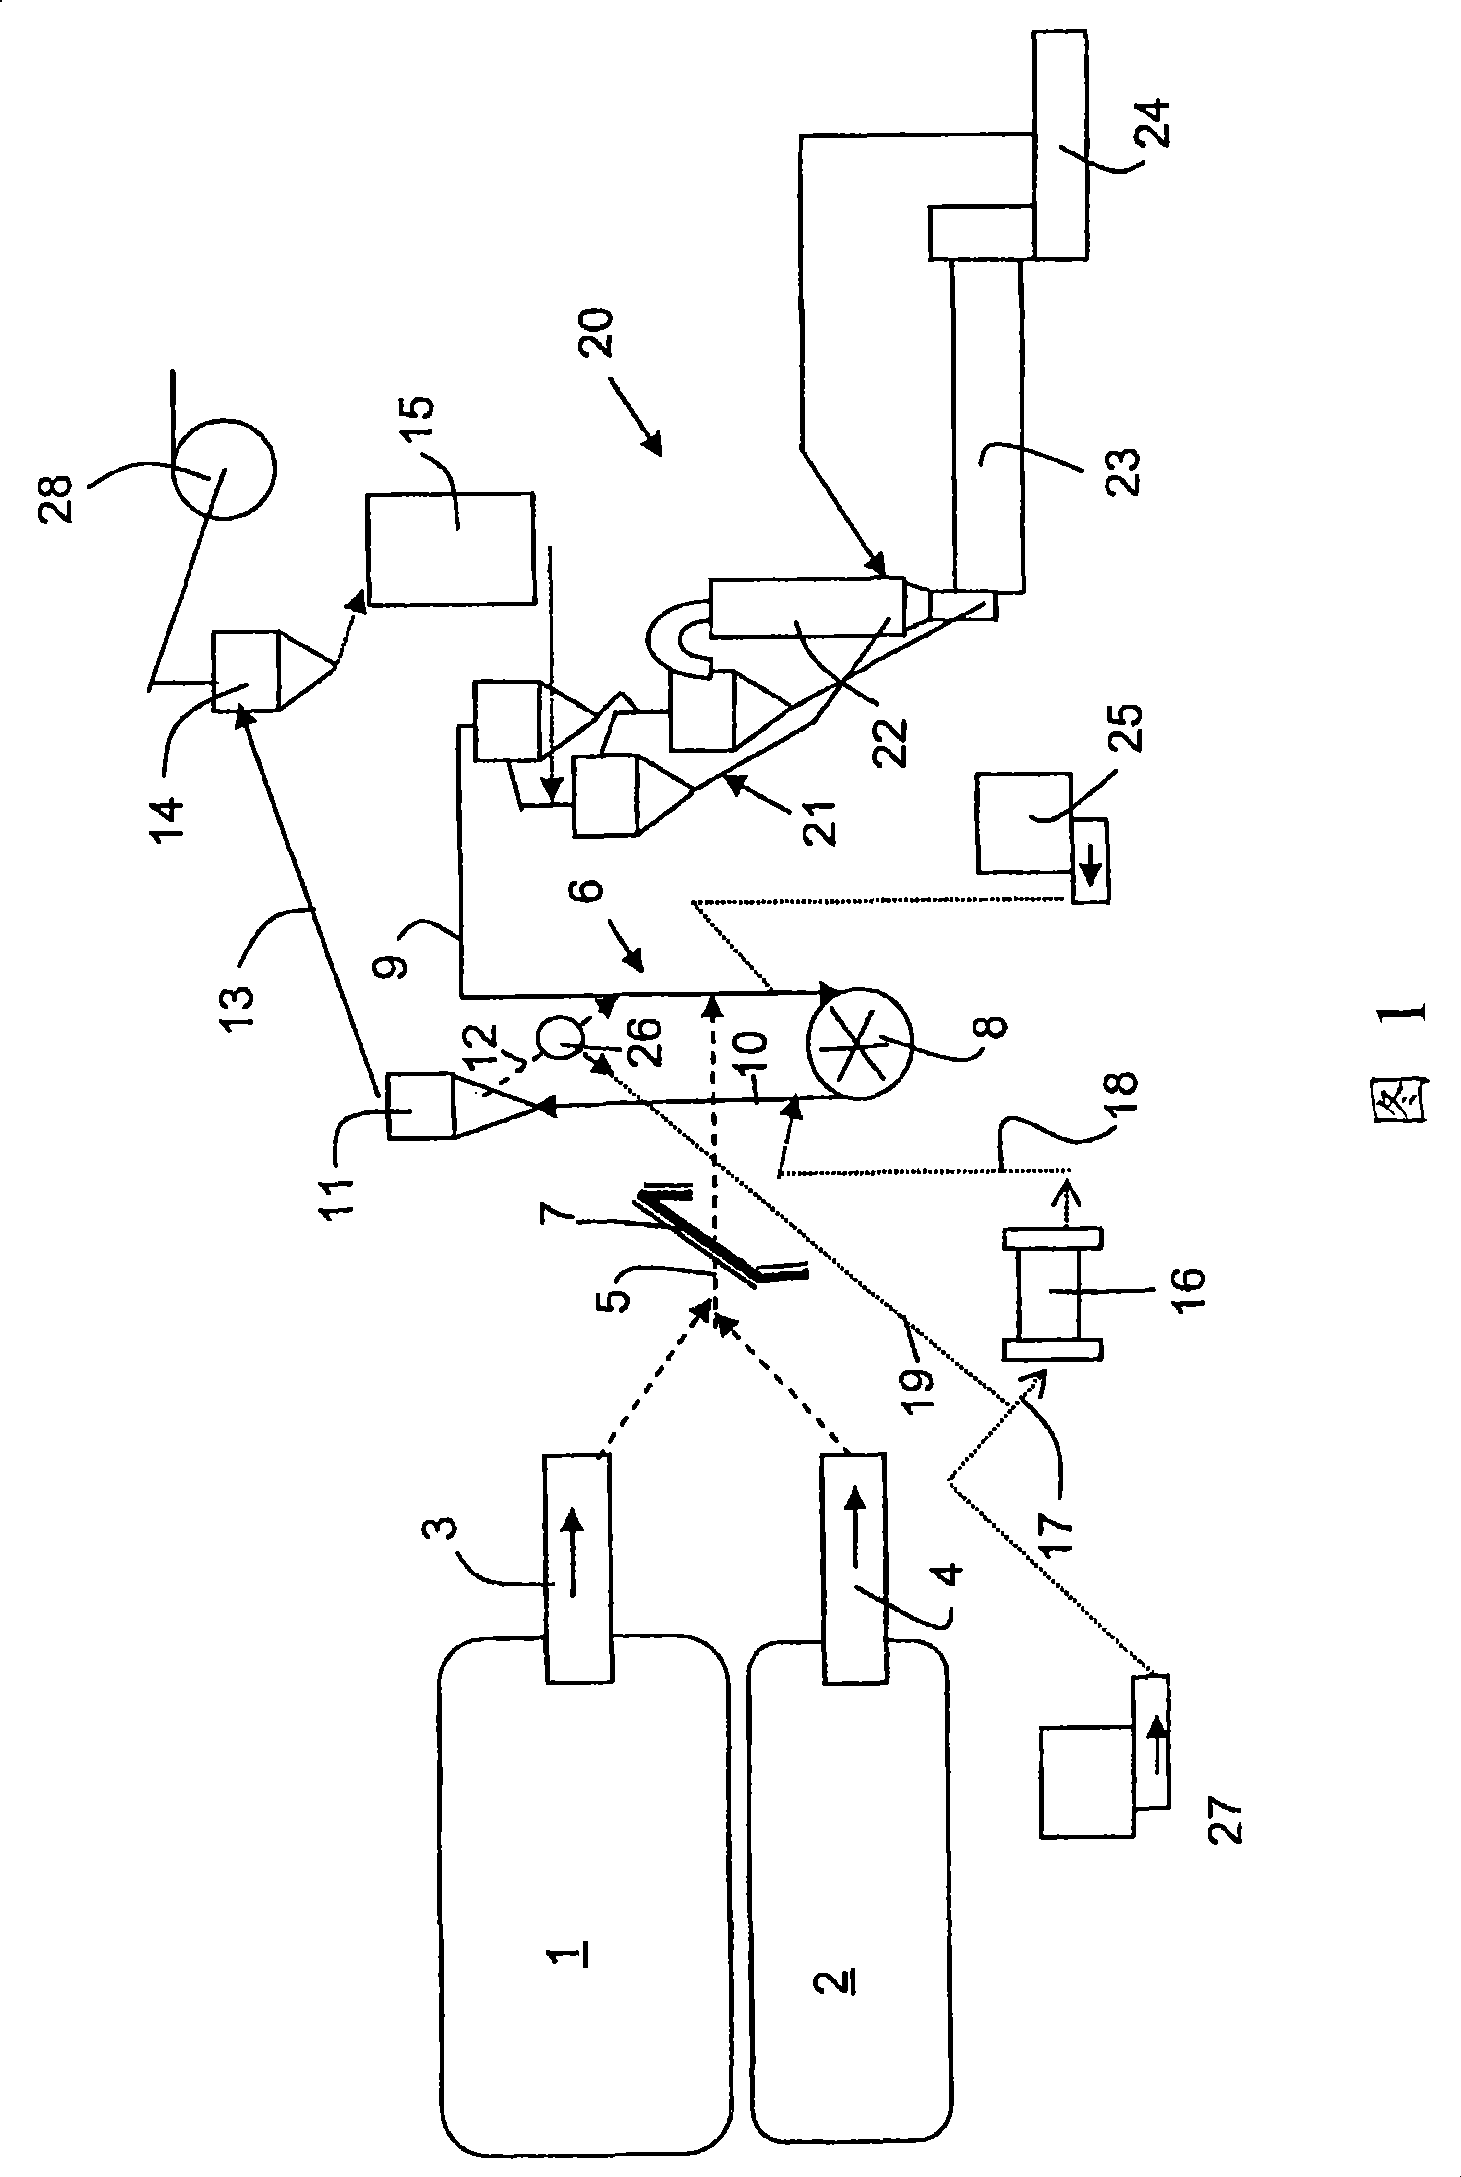 Method and plant for drying and comminution of moist, mineral raw materials